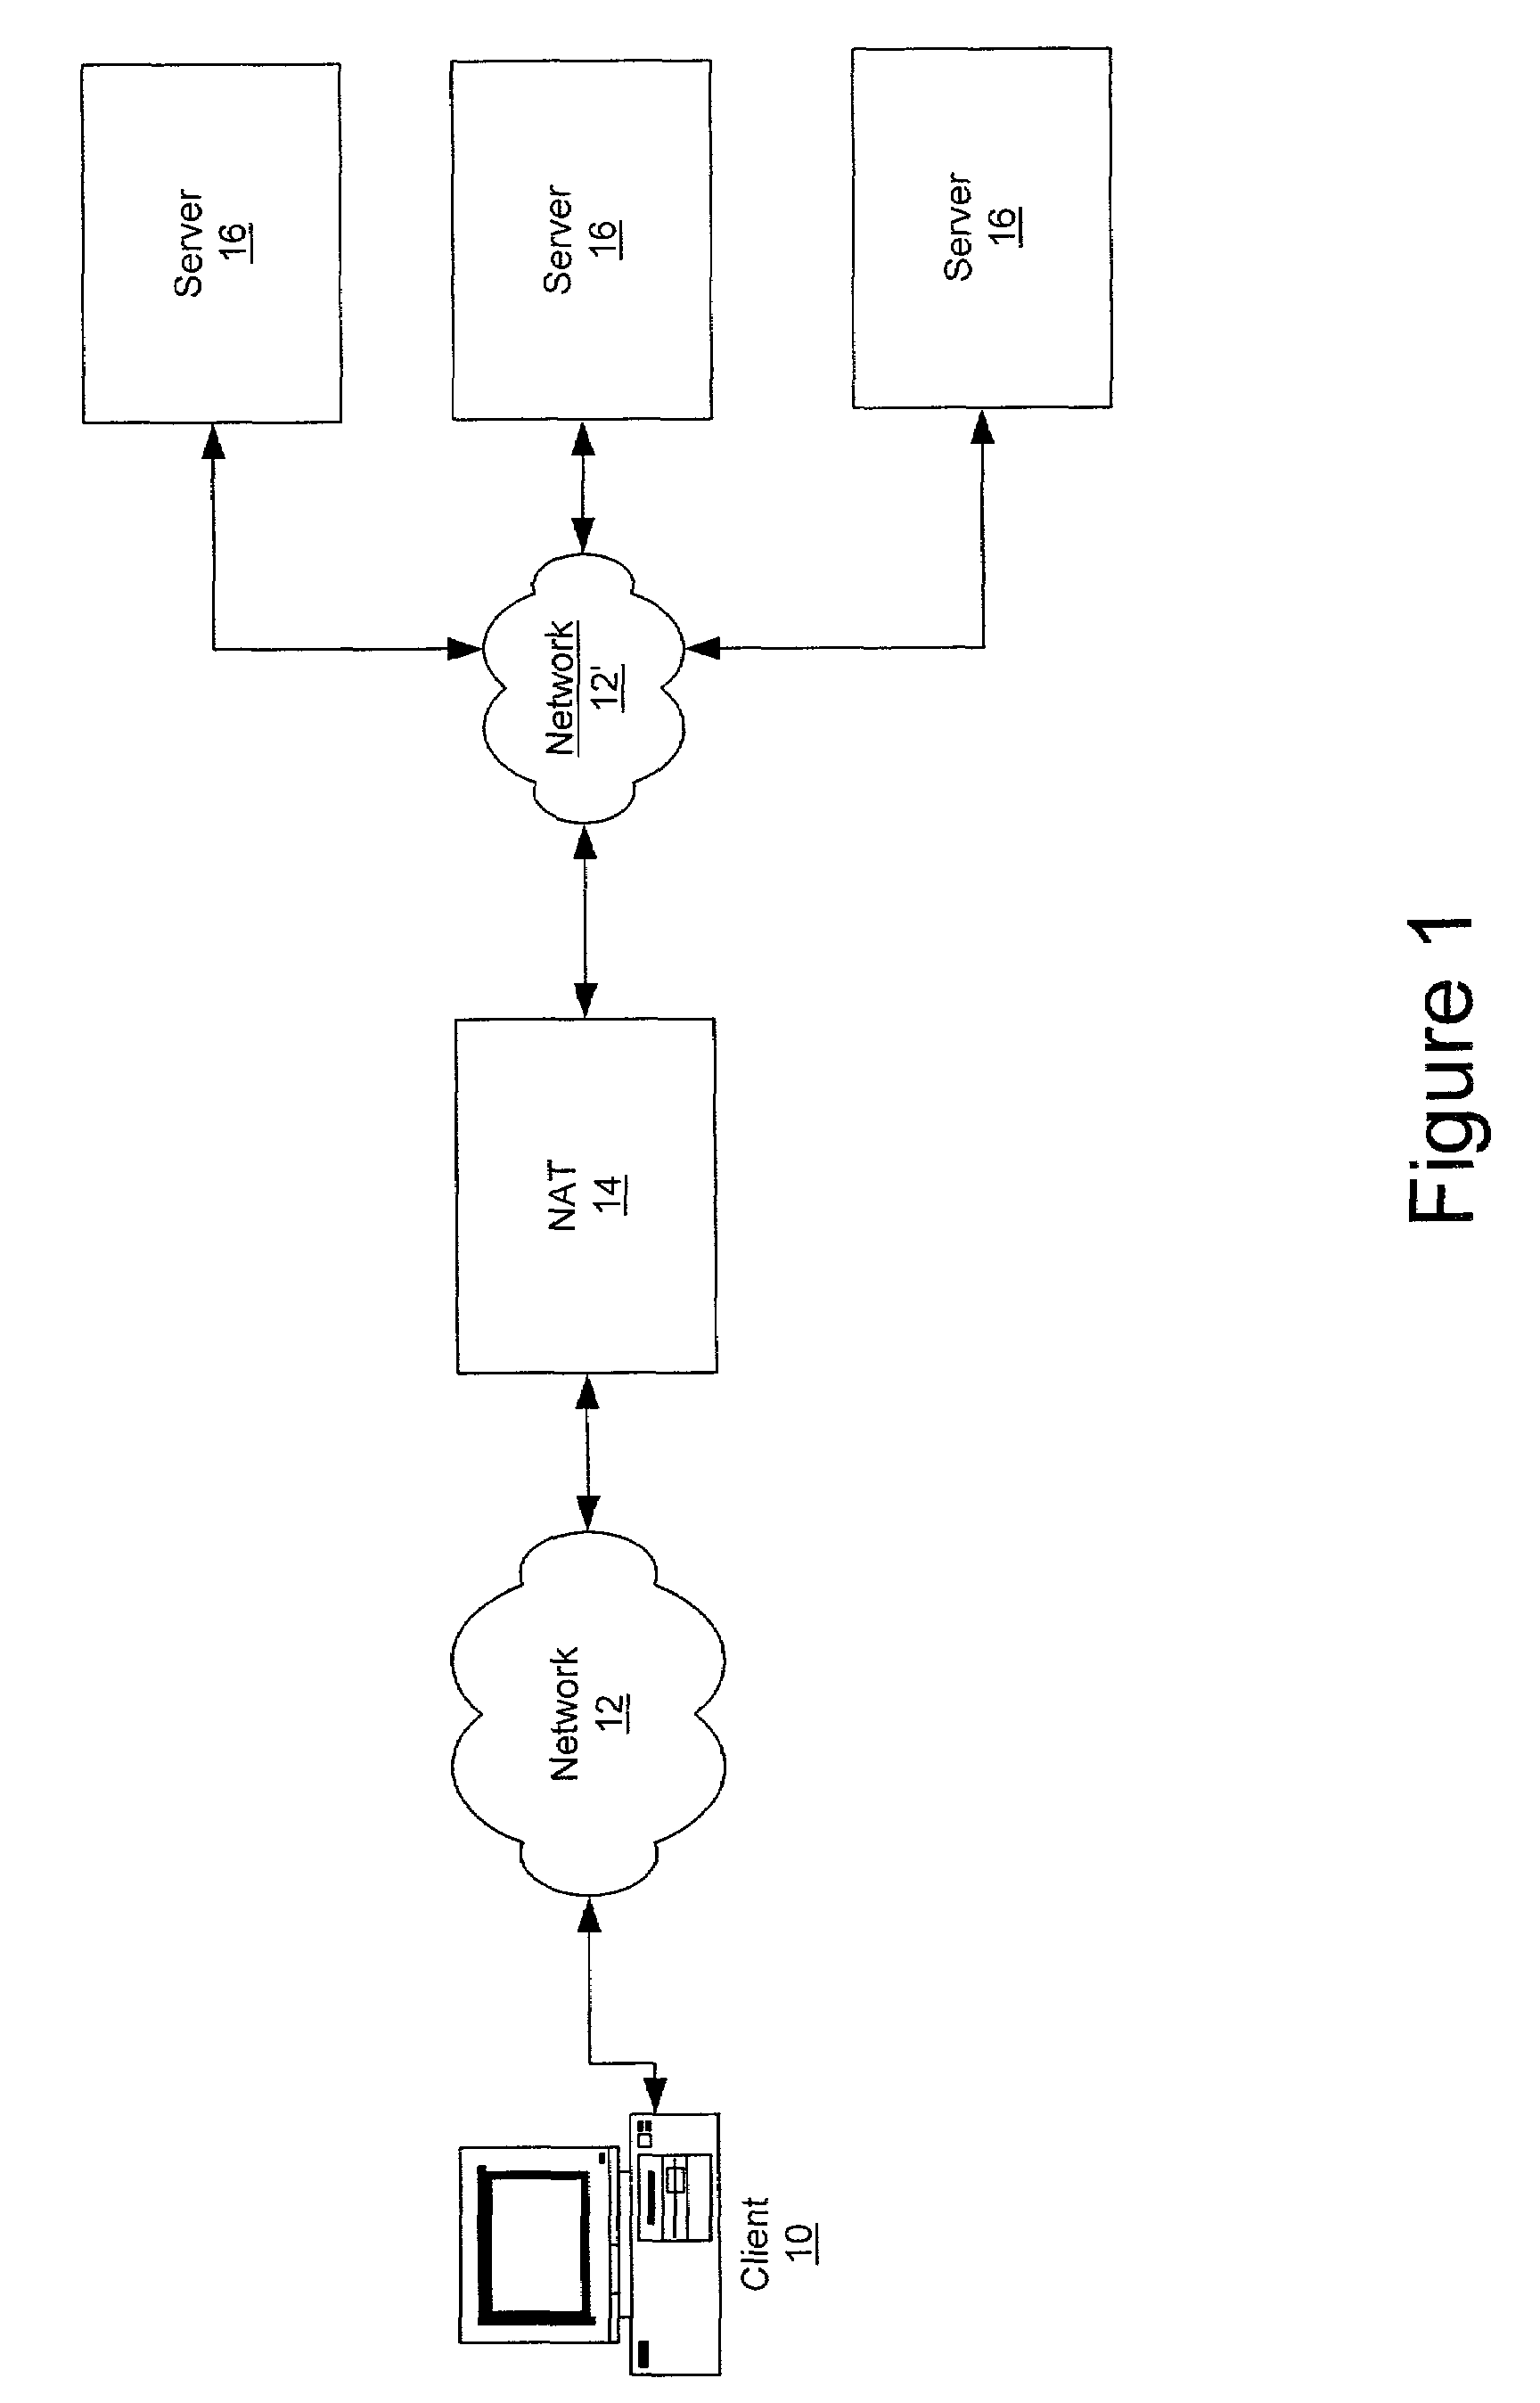 Methods, systems and computer program products for security processing inbound communications in a cluster computing environment